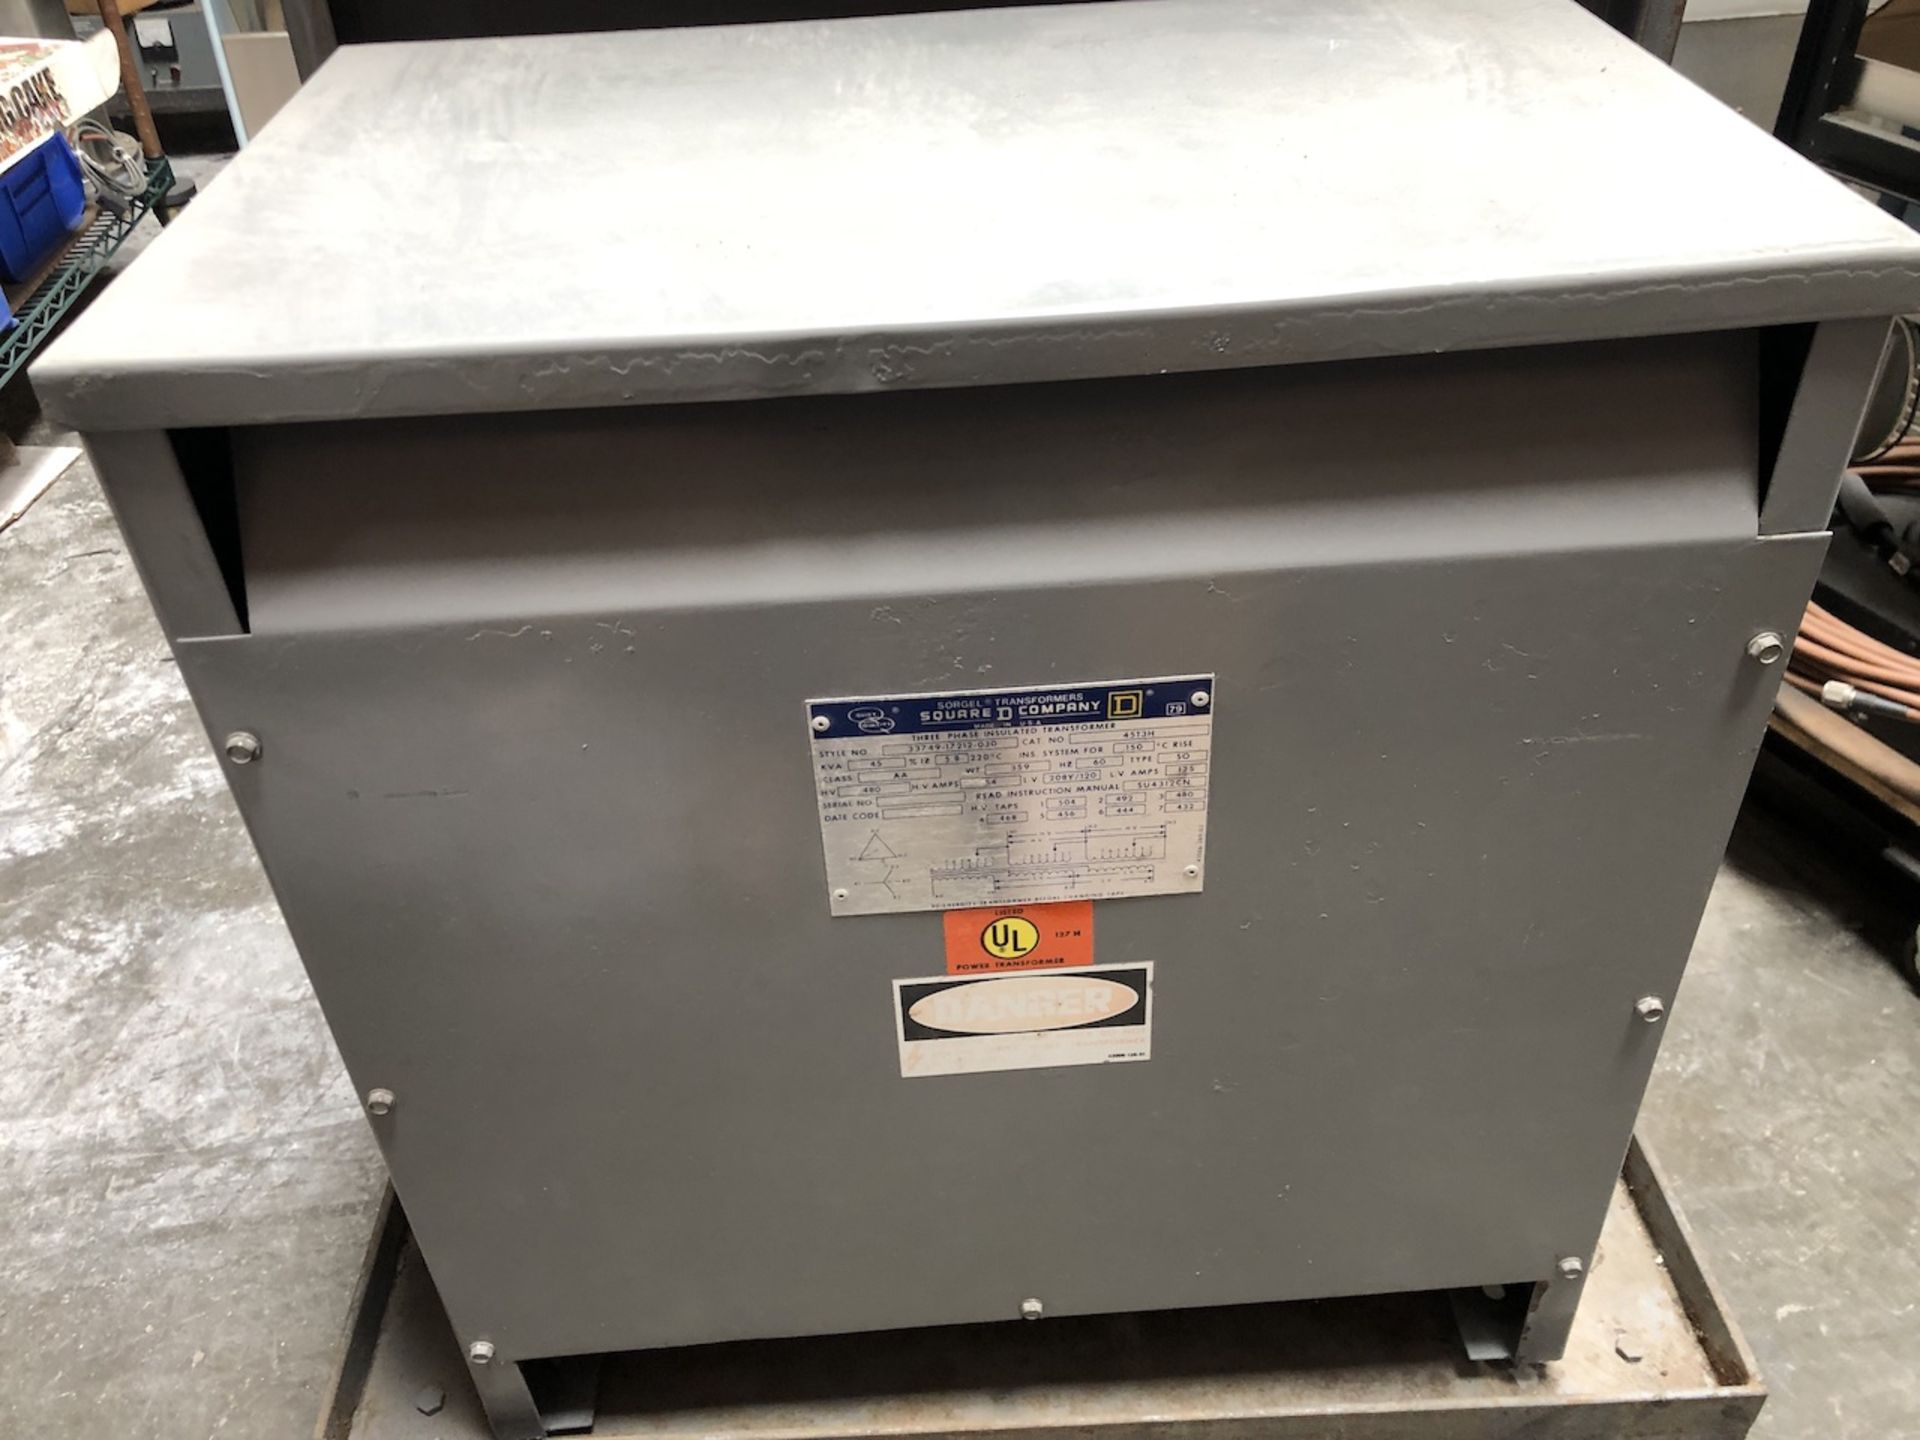 SQUARE D COMPANY: THREE PHASE INSULATED TRANSFORMER STYLE#: 33749-17212-030 CAT#: 45T3H, VARIAN - Image 8 of 11